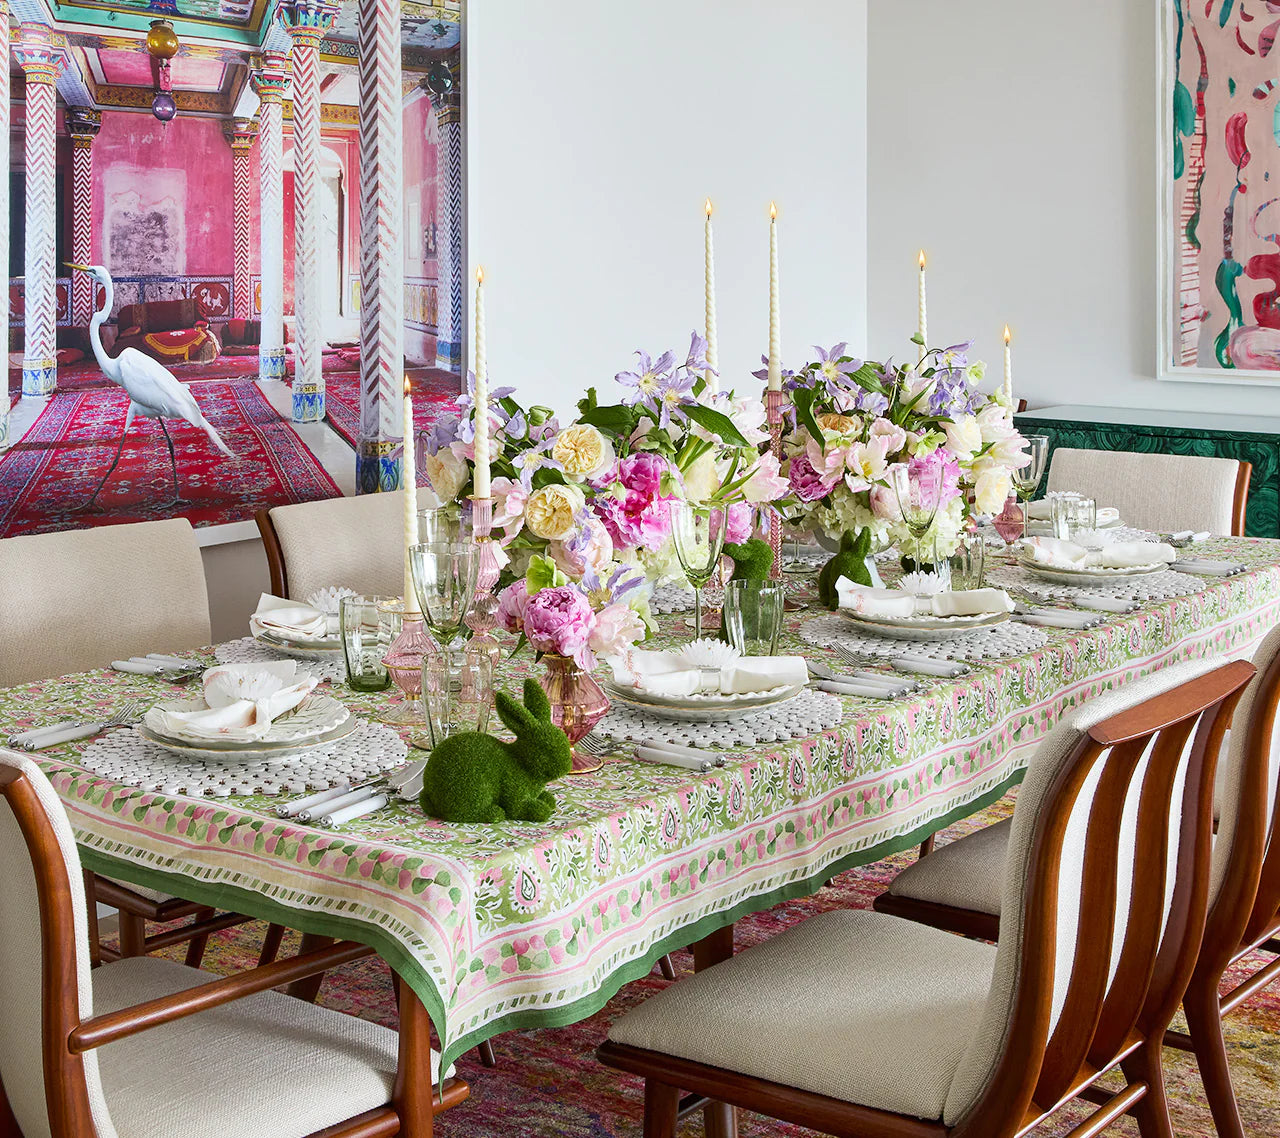 Mira Tablecloth in Green & Pink